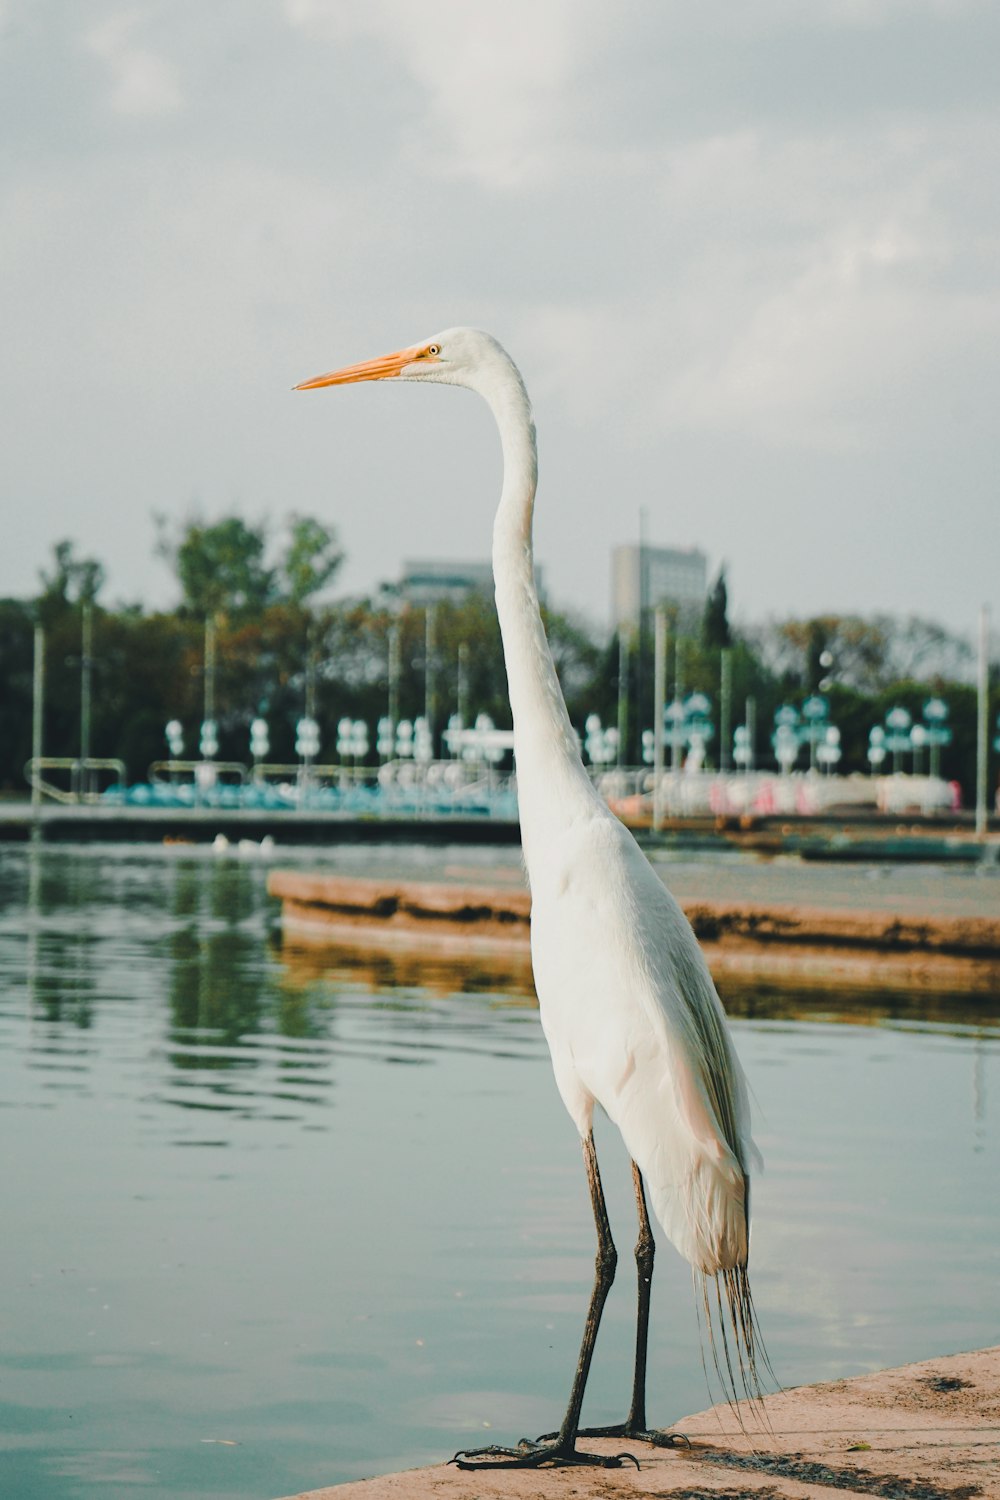 a large white bird standing on the edge of a body of water